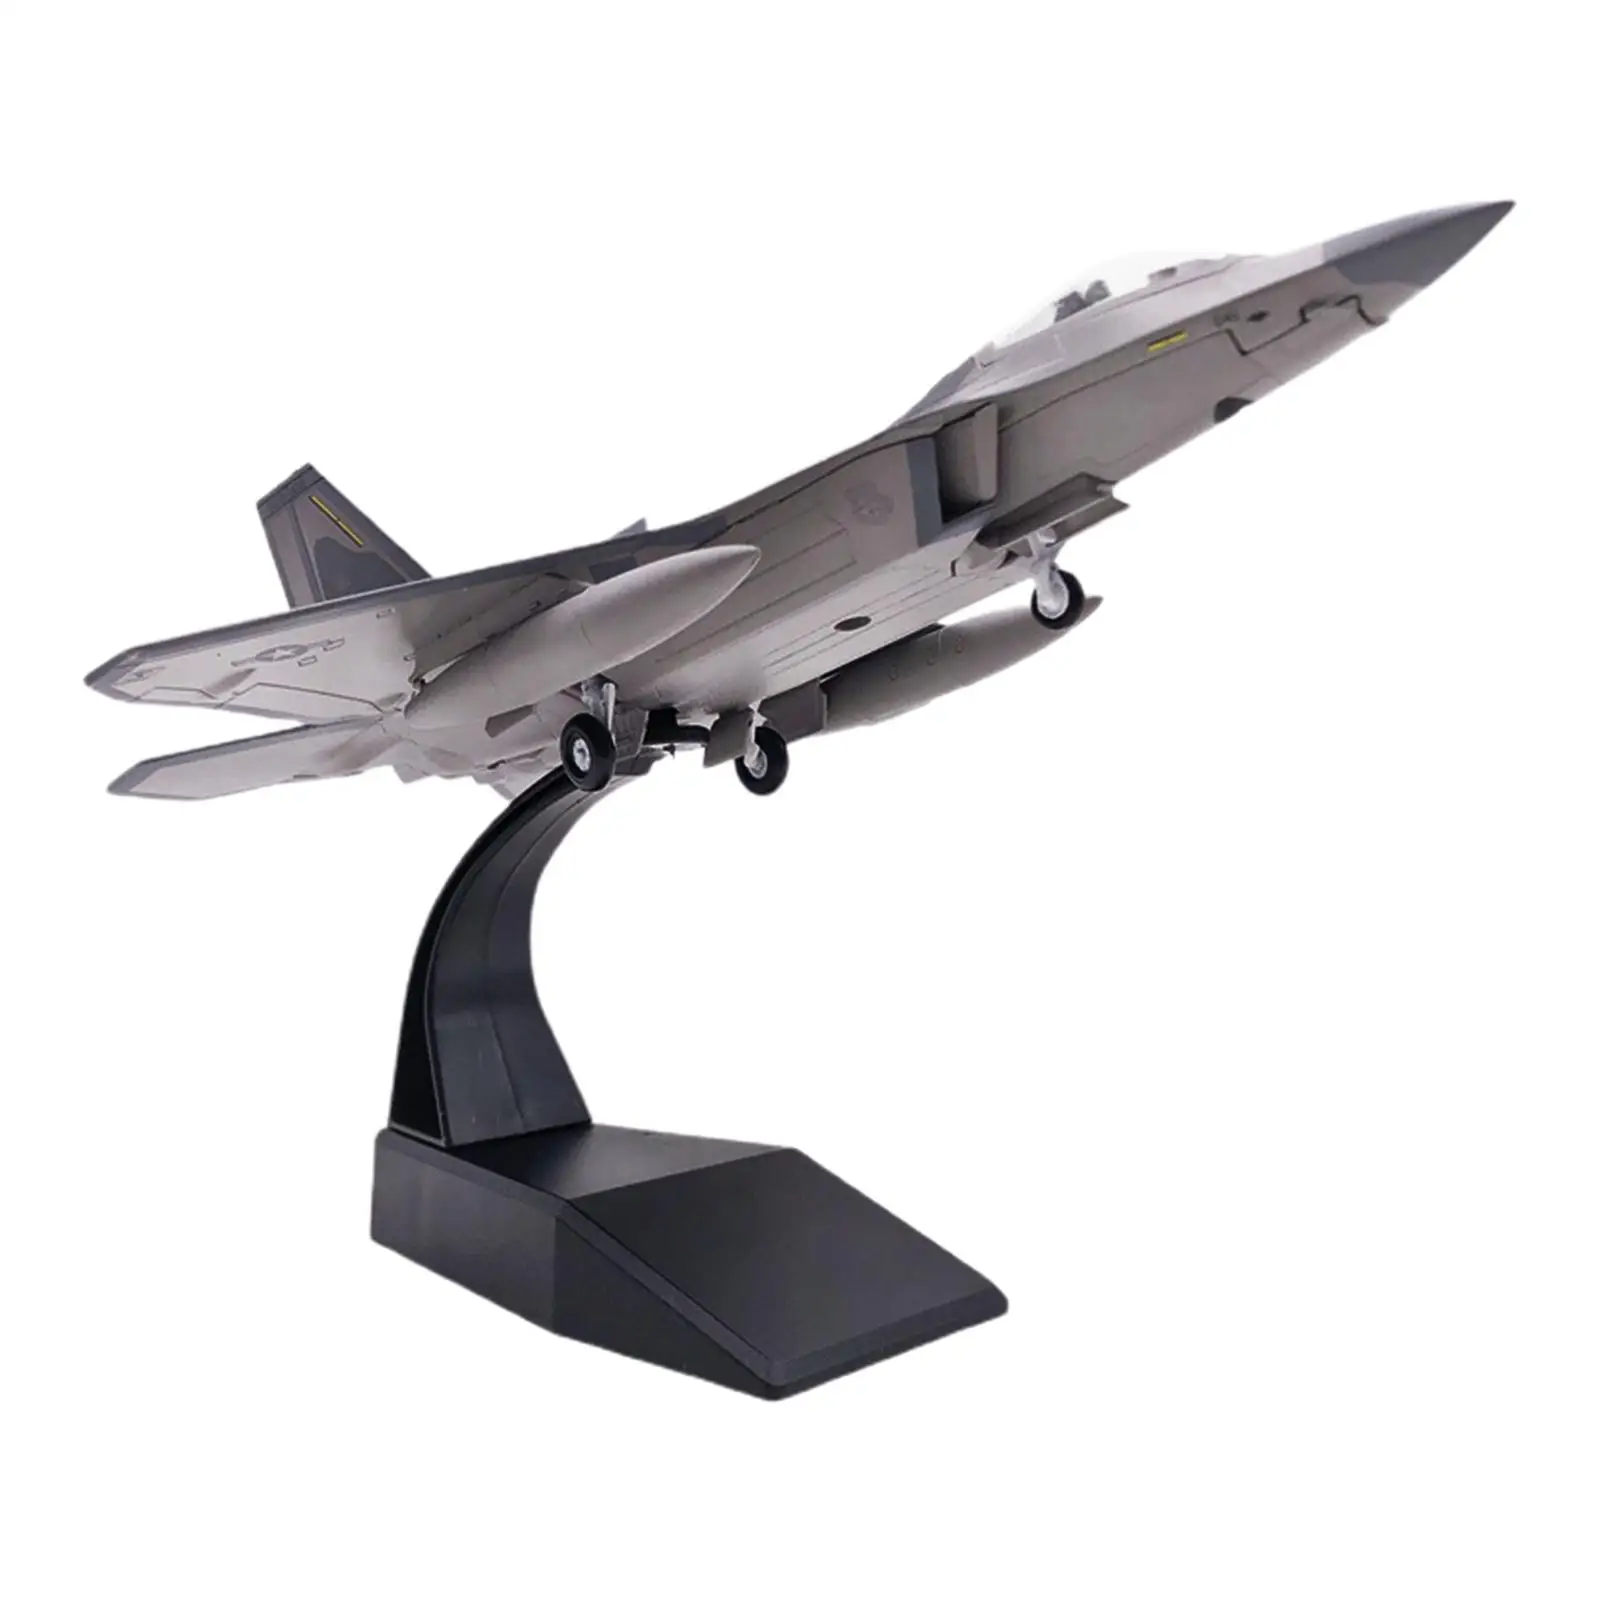 1:100 Scale F22 Fighter with Stand Fighter Model Toy Alloy Plane Collection